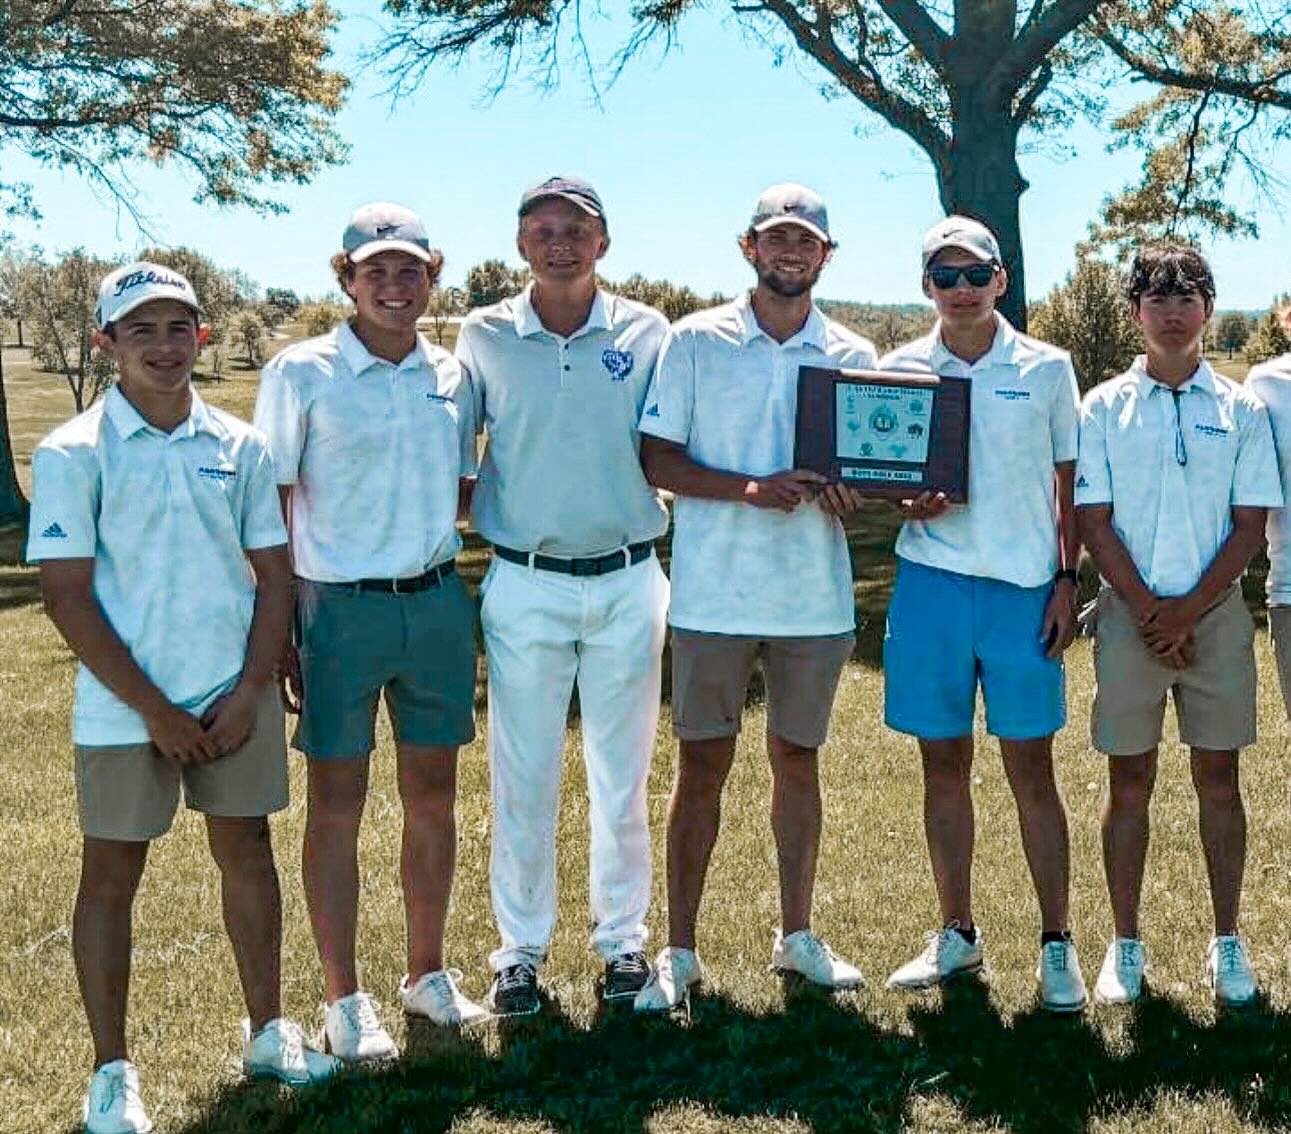 Big Shoutout and congrats to our student Matt Parker for taking home medalist honors shootings +2 74 on Monday at Districts held at Fred Arbanis golf course! 

(Pictured 2nd from right)